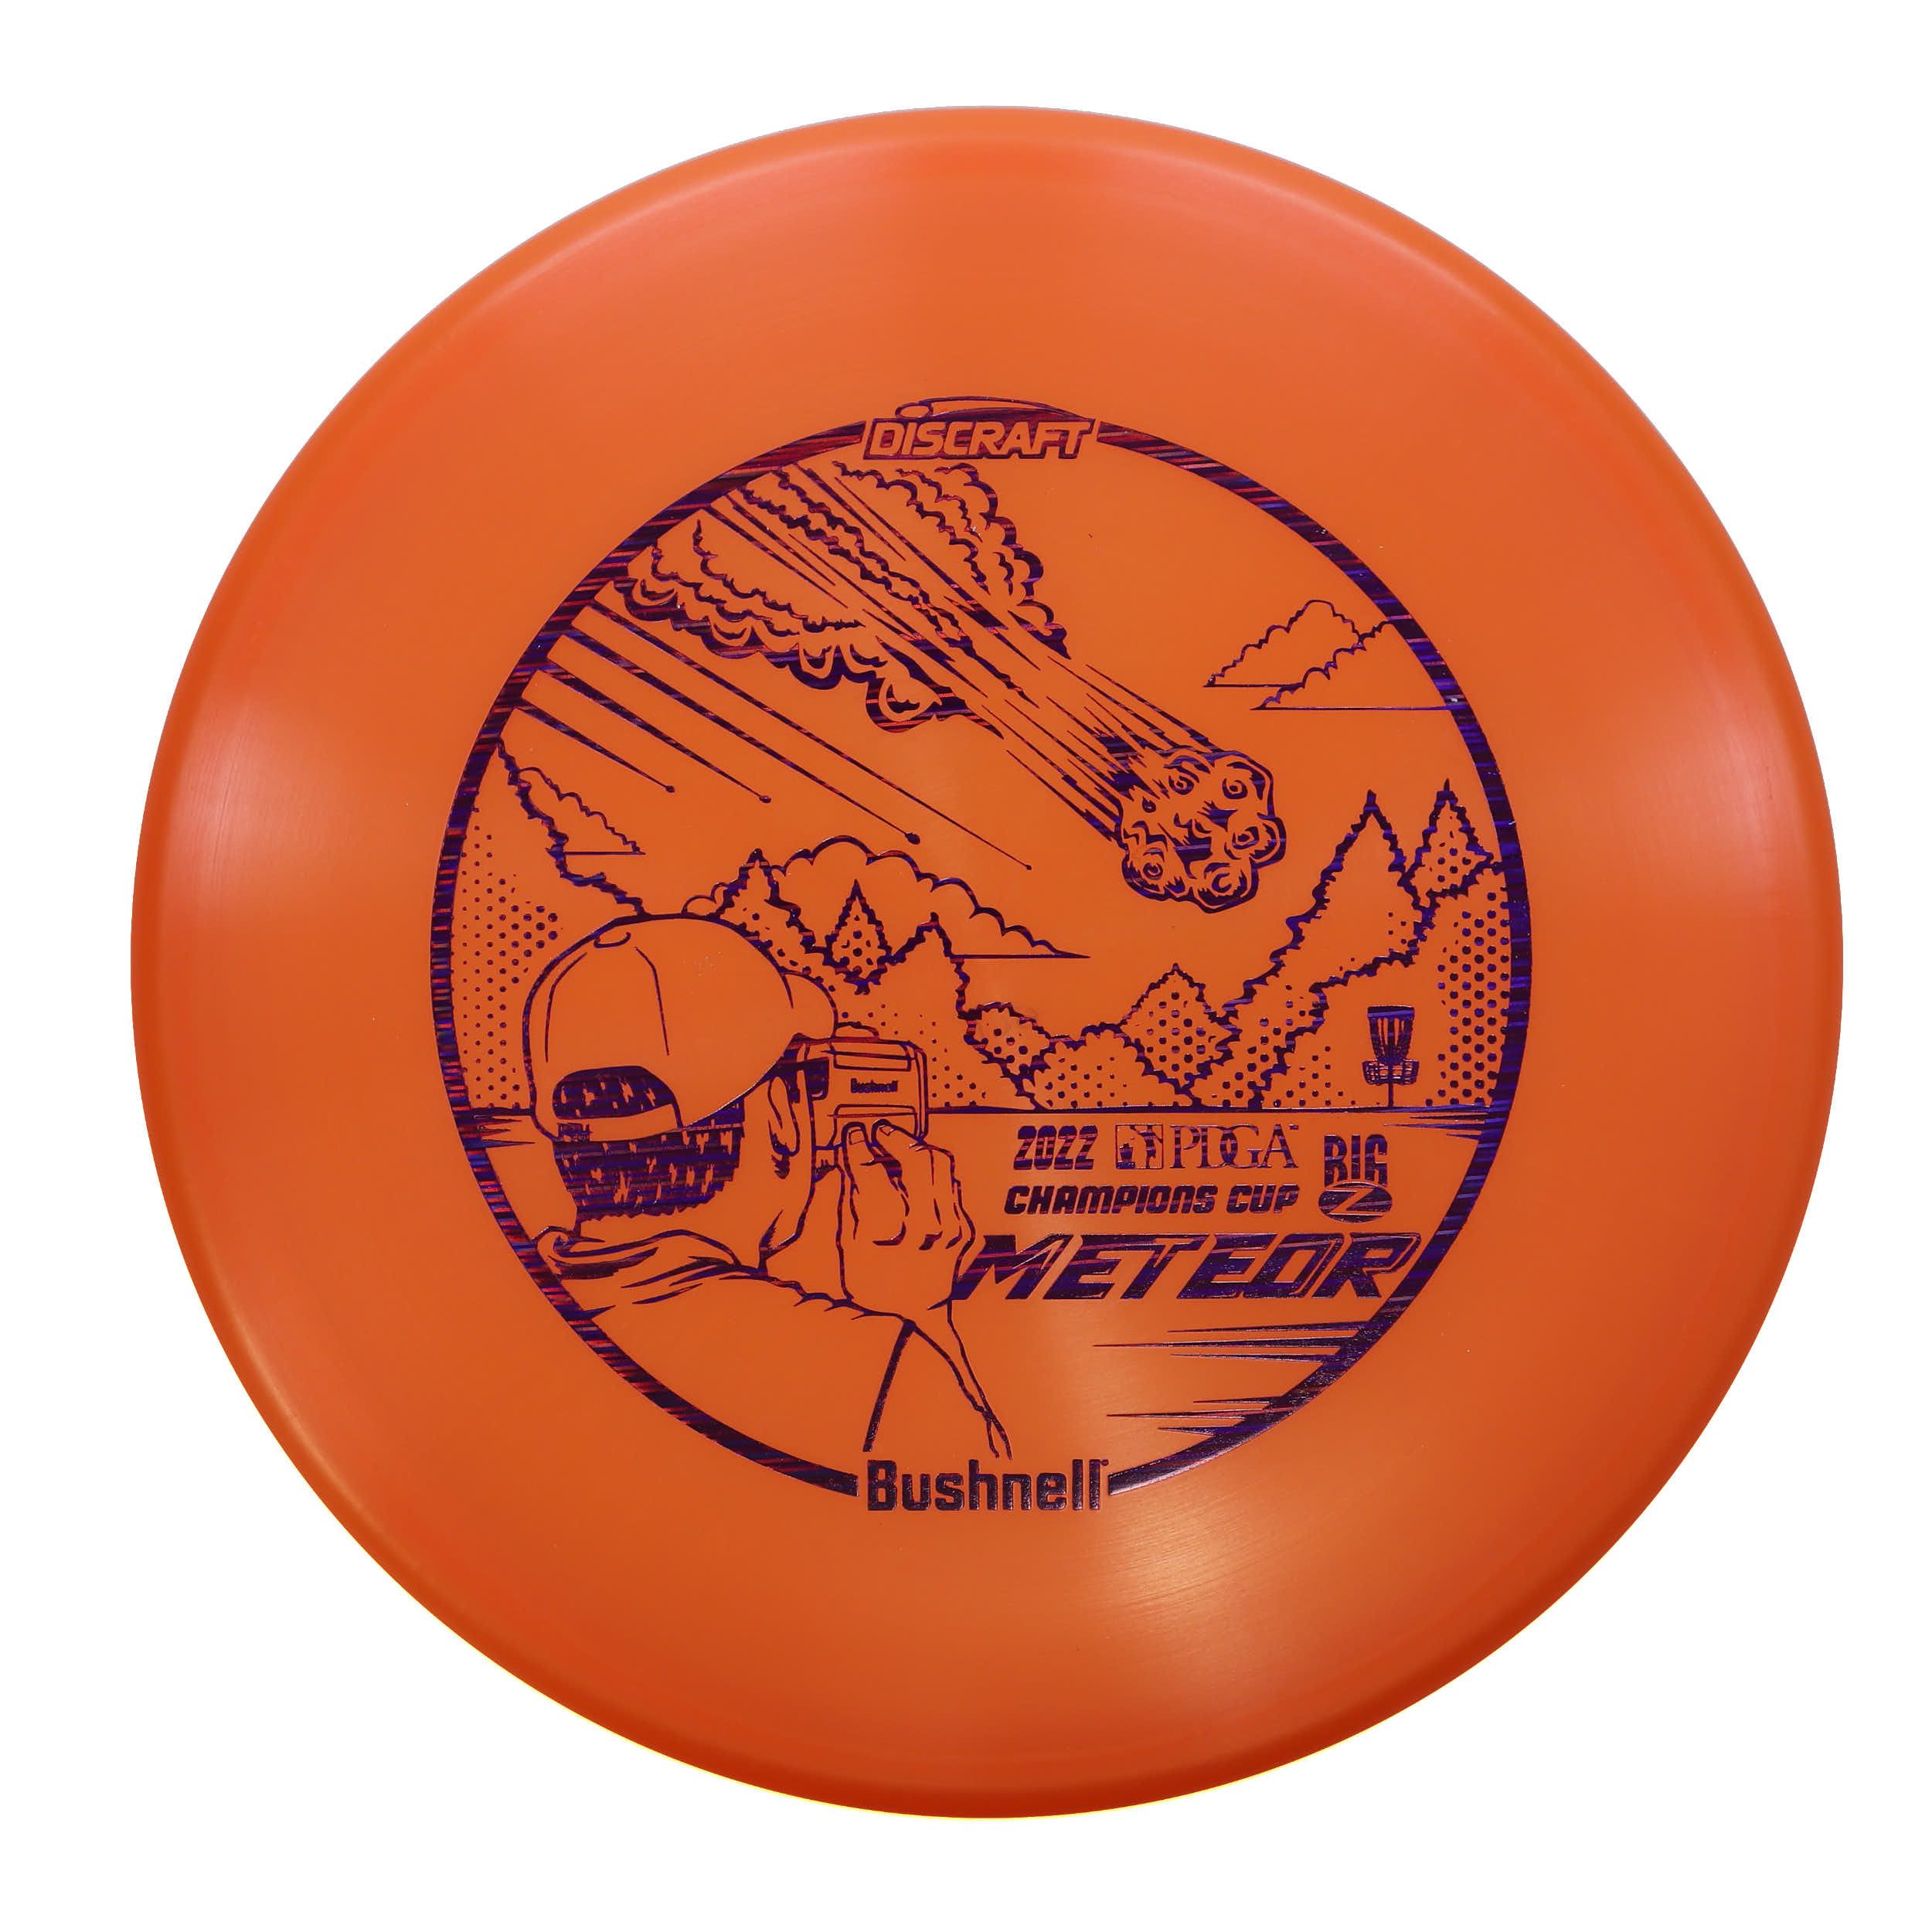 Discraft Limited Edition 2022 Champions Cup Bushnell Big Z Meteor Midrange Golf Disc